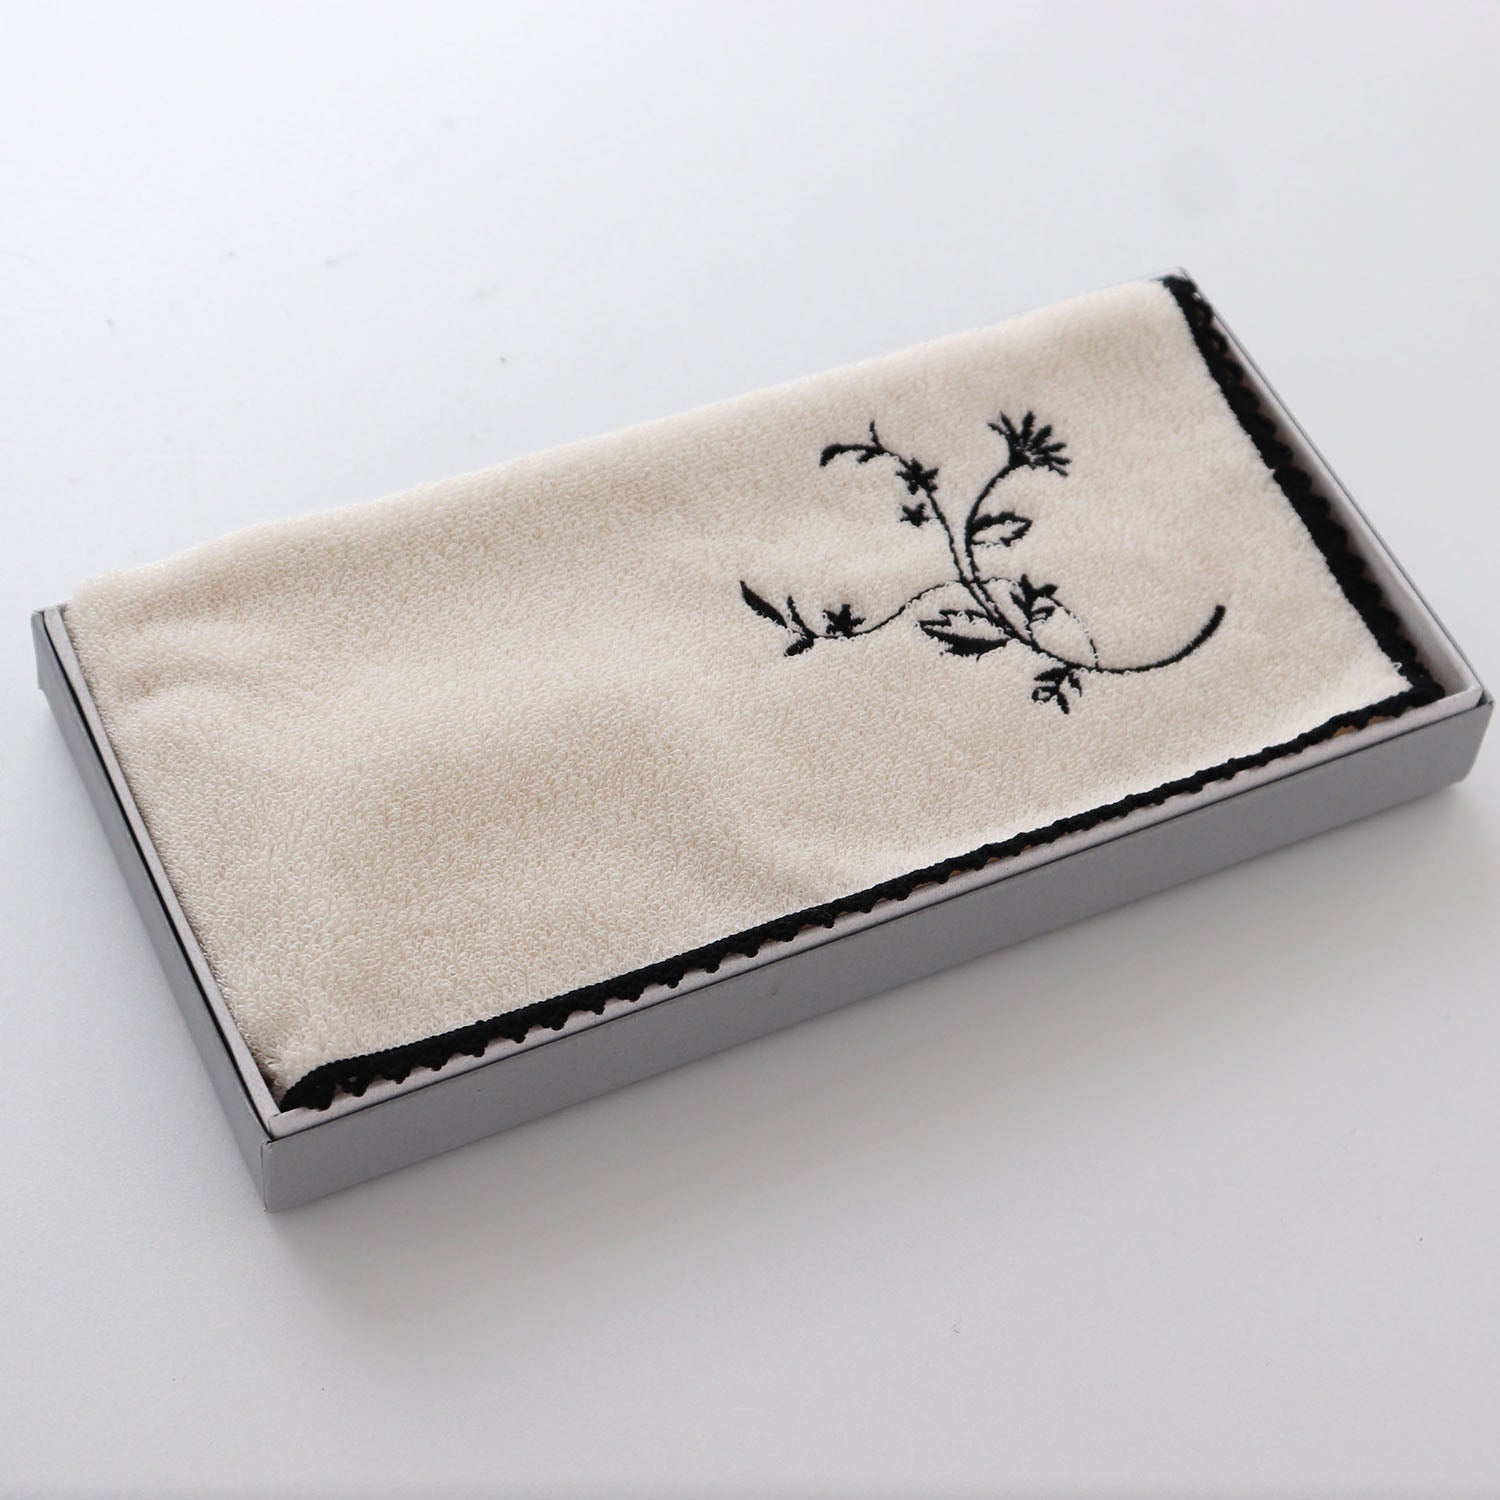 Organic Towel Handkerchief with Flower Embroidery